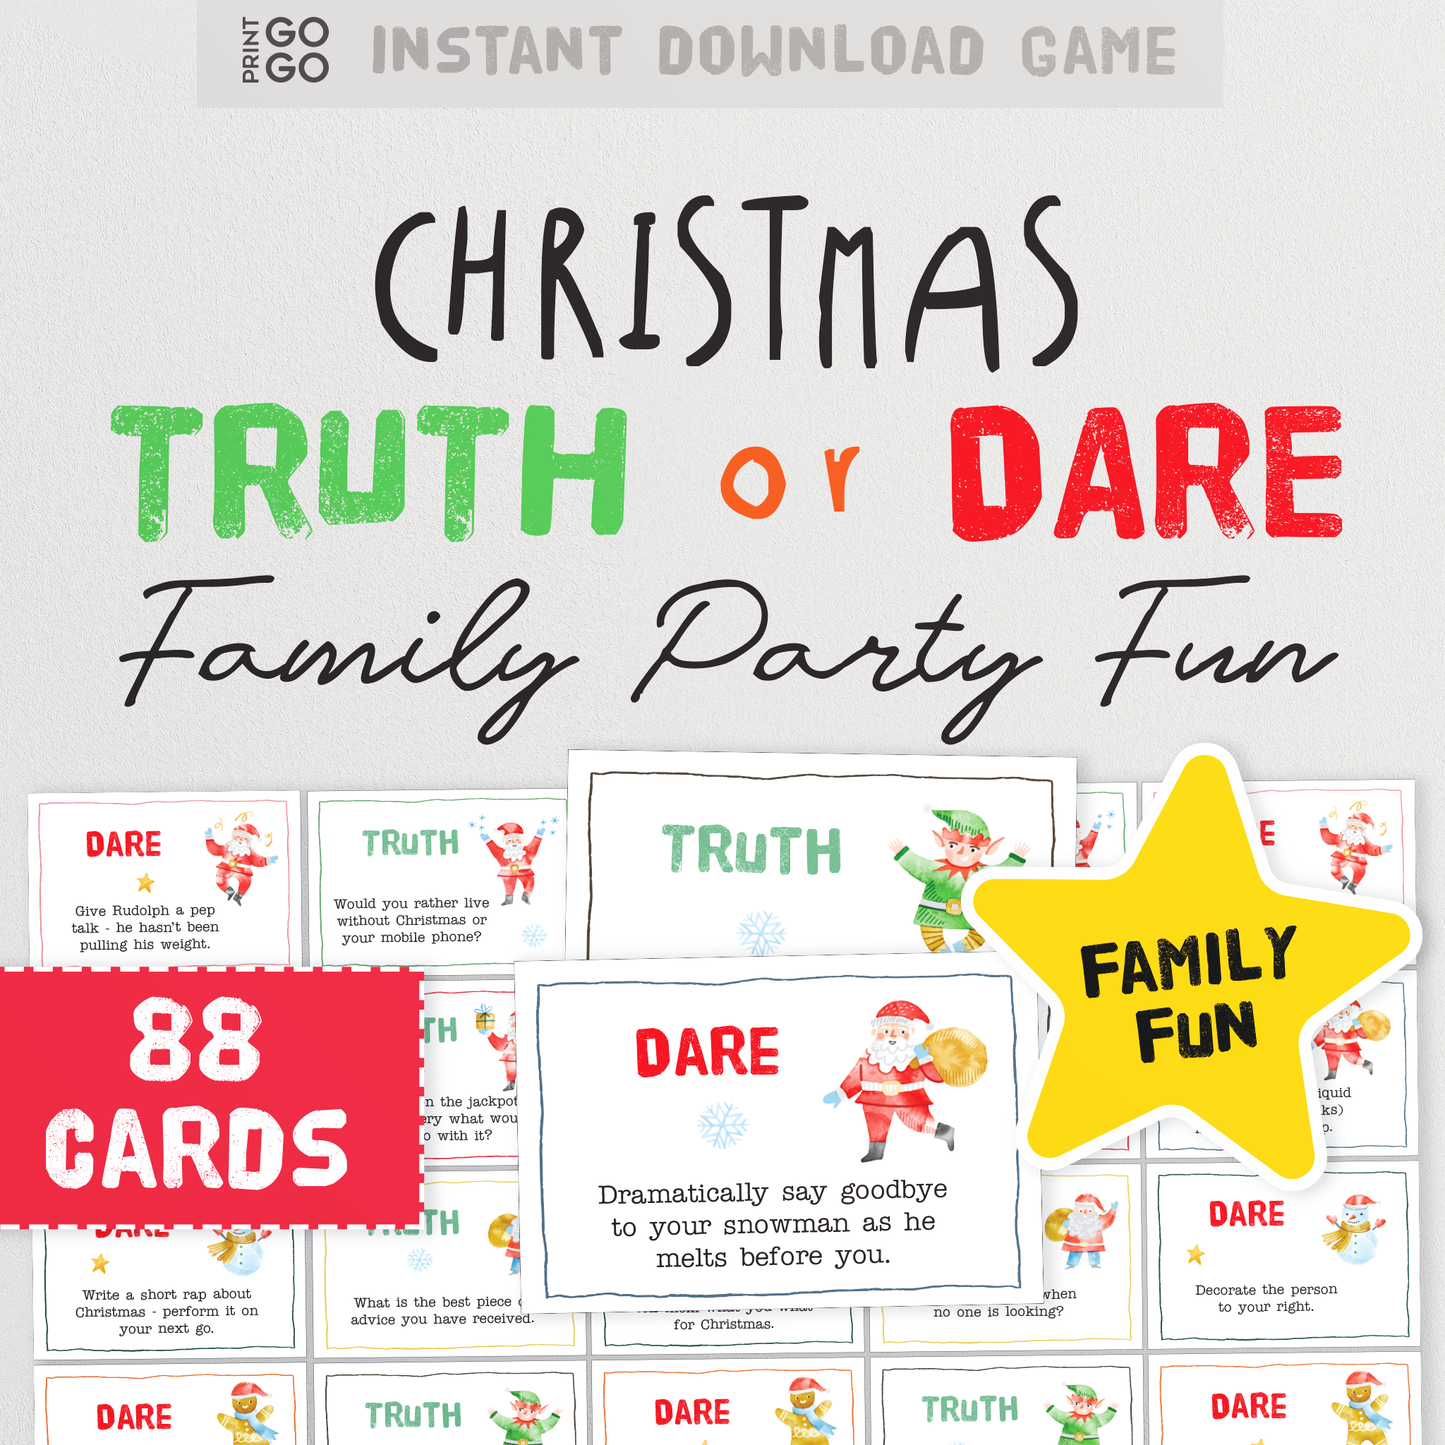 Christmas Truth or Dare Cards - The Fun Holiday Party Game for Kids and Families!